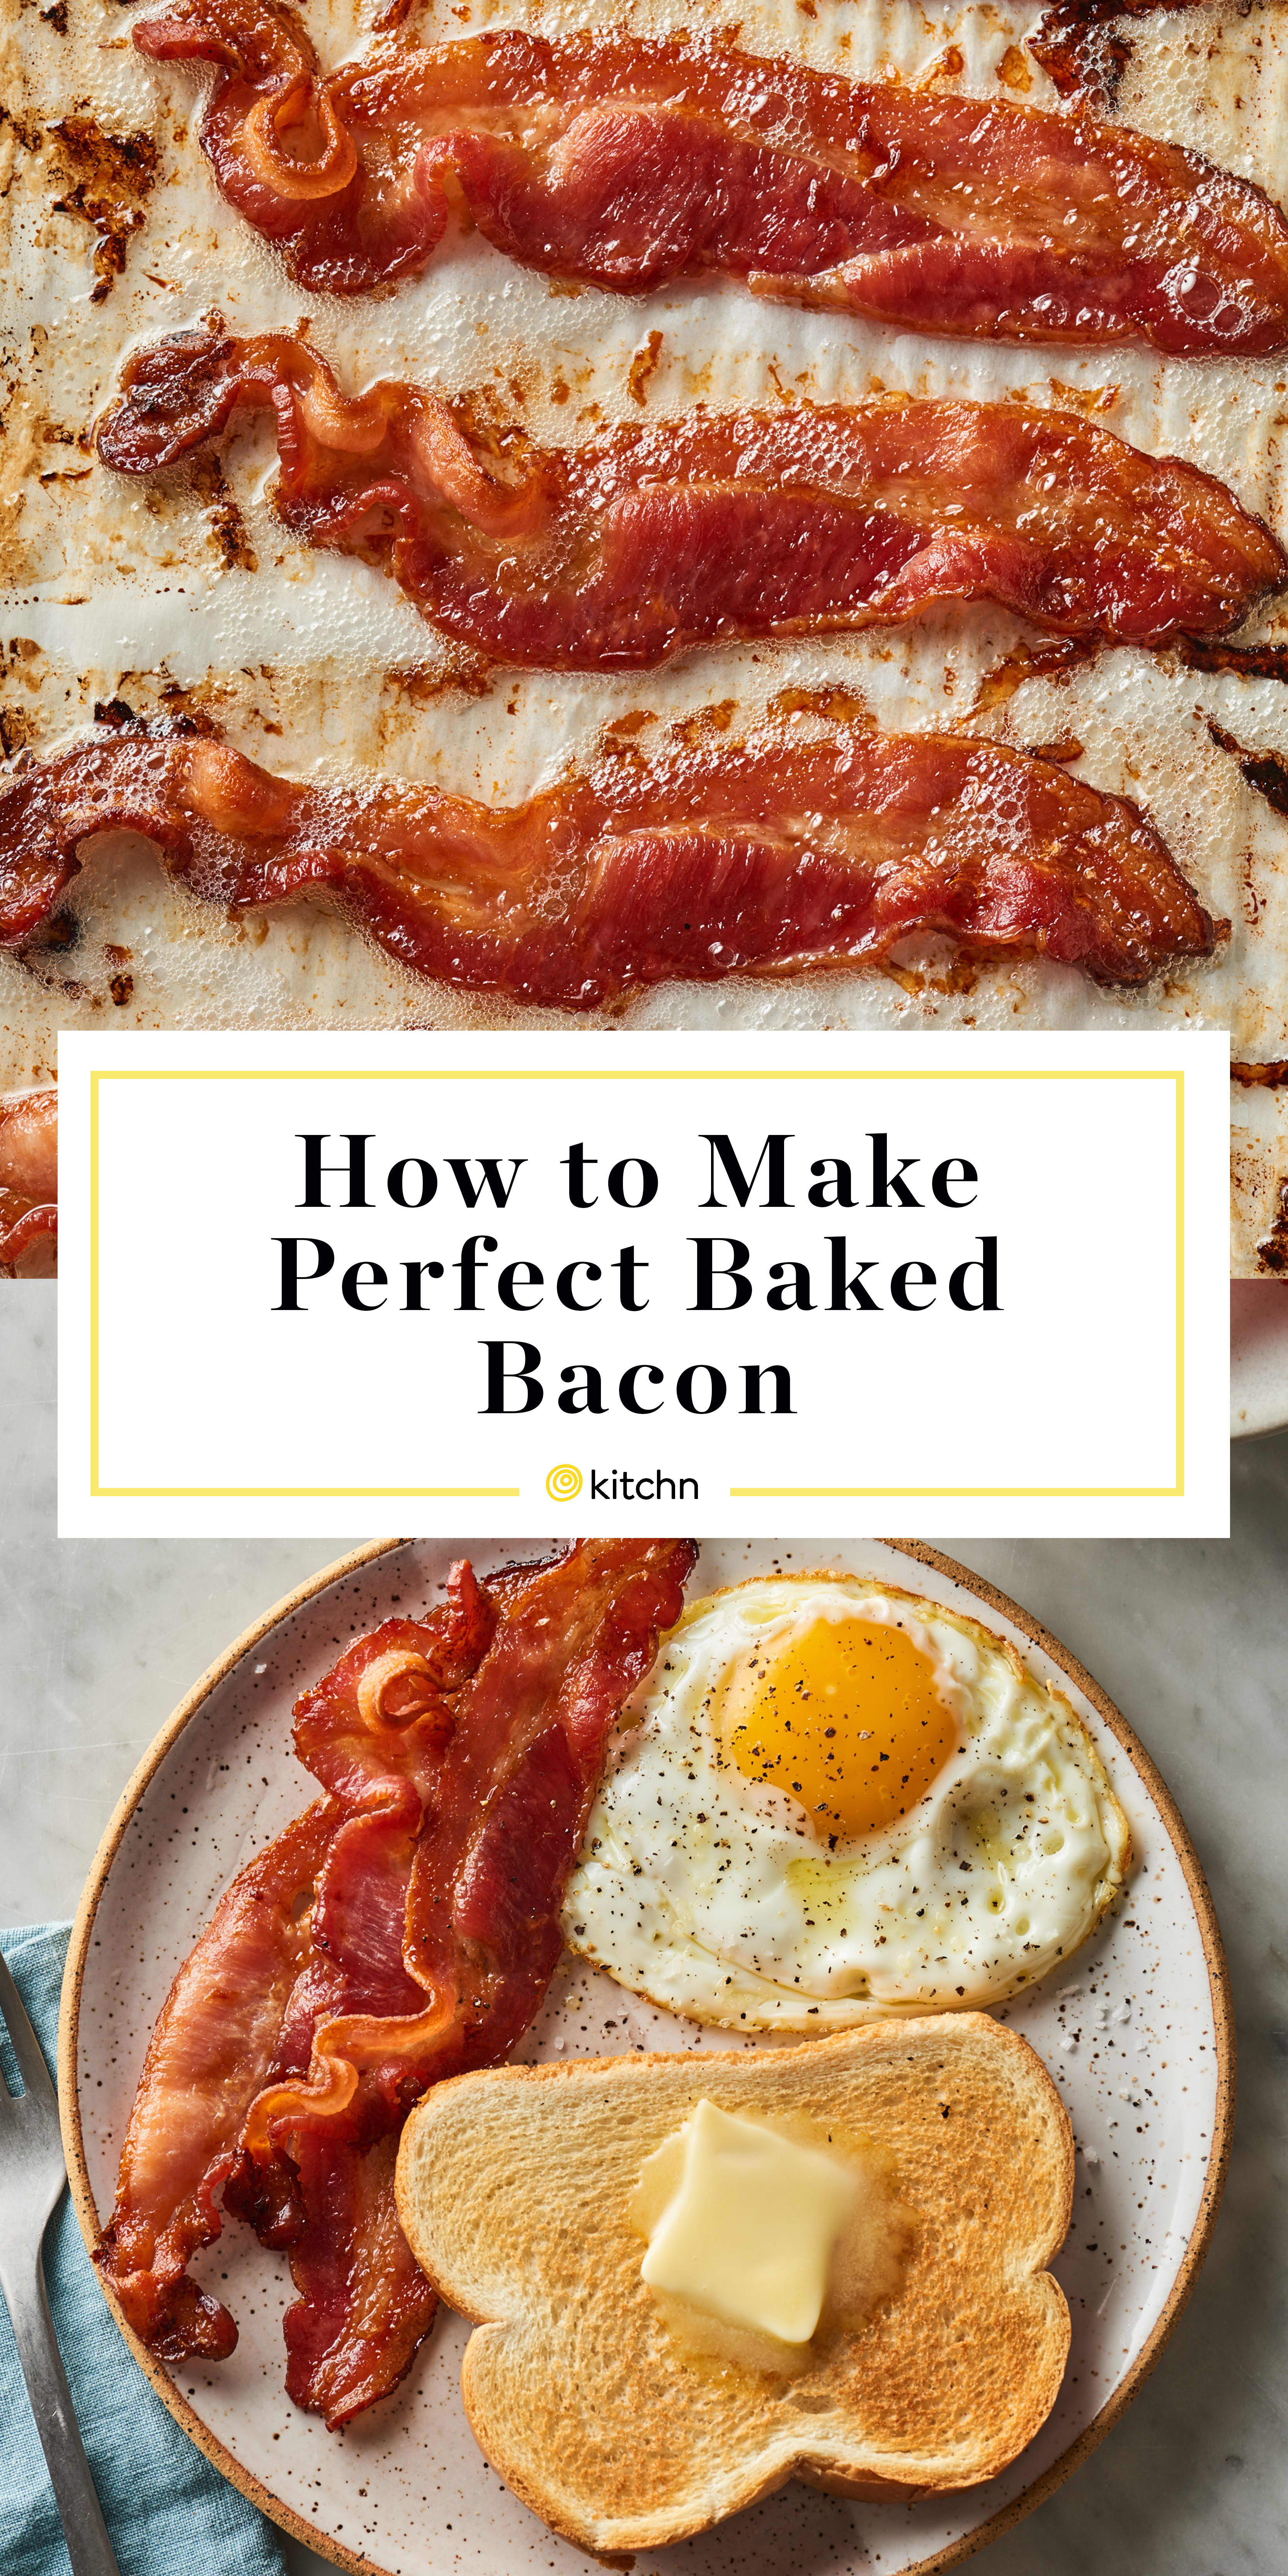 How To Make Bacon In The Oven The Simplest Easiest Recipe Kitchn,Chow Chow Relish For Sale